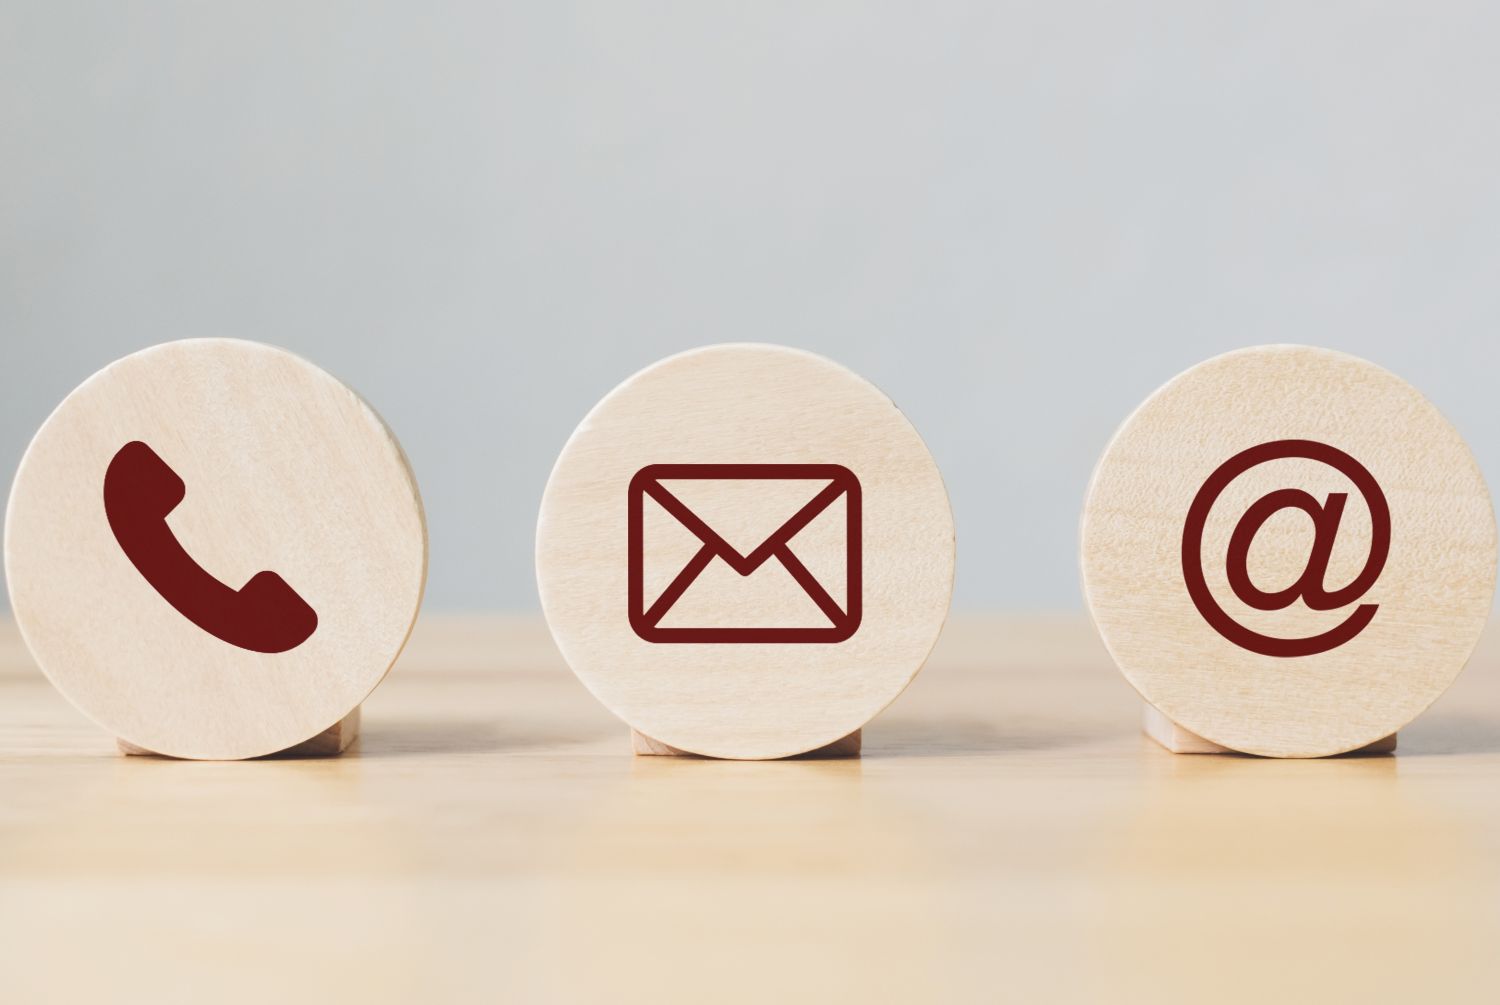 photo of three small round wooden blocks sitting on a wood base with images in dark brown from left to right, a phone, envelope and an @ sign. background is light grey.